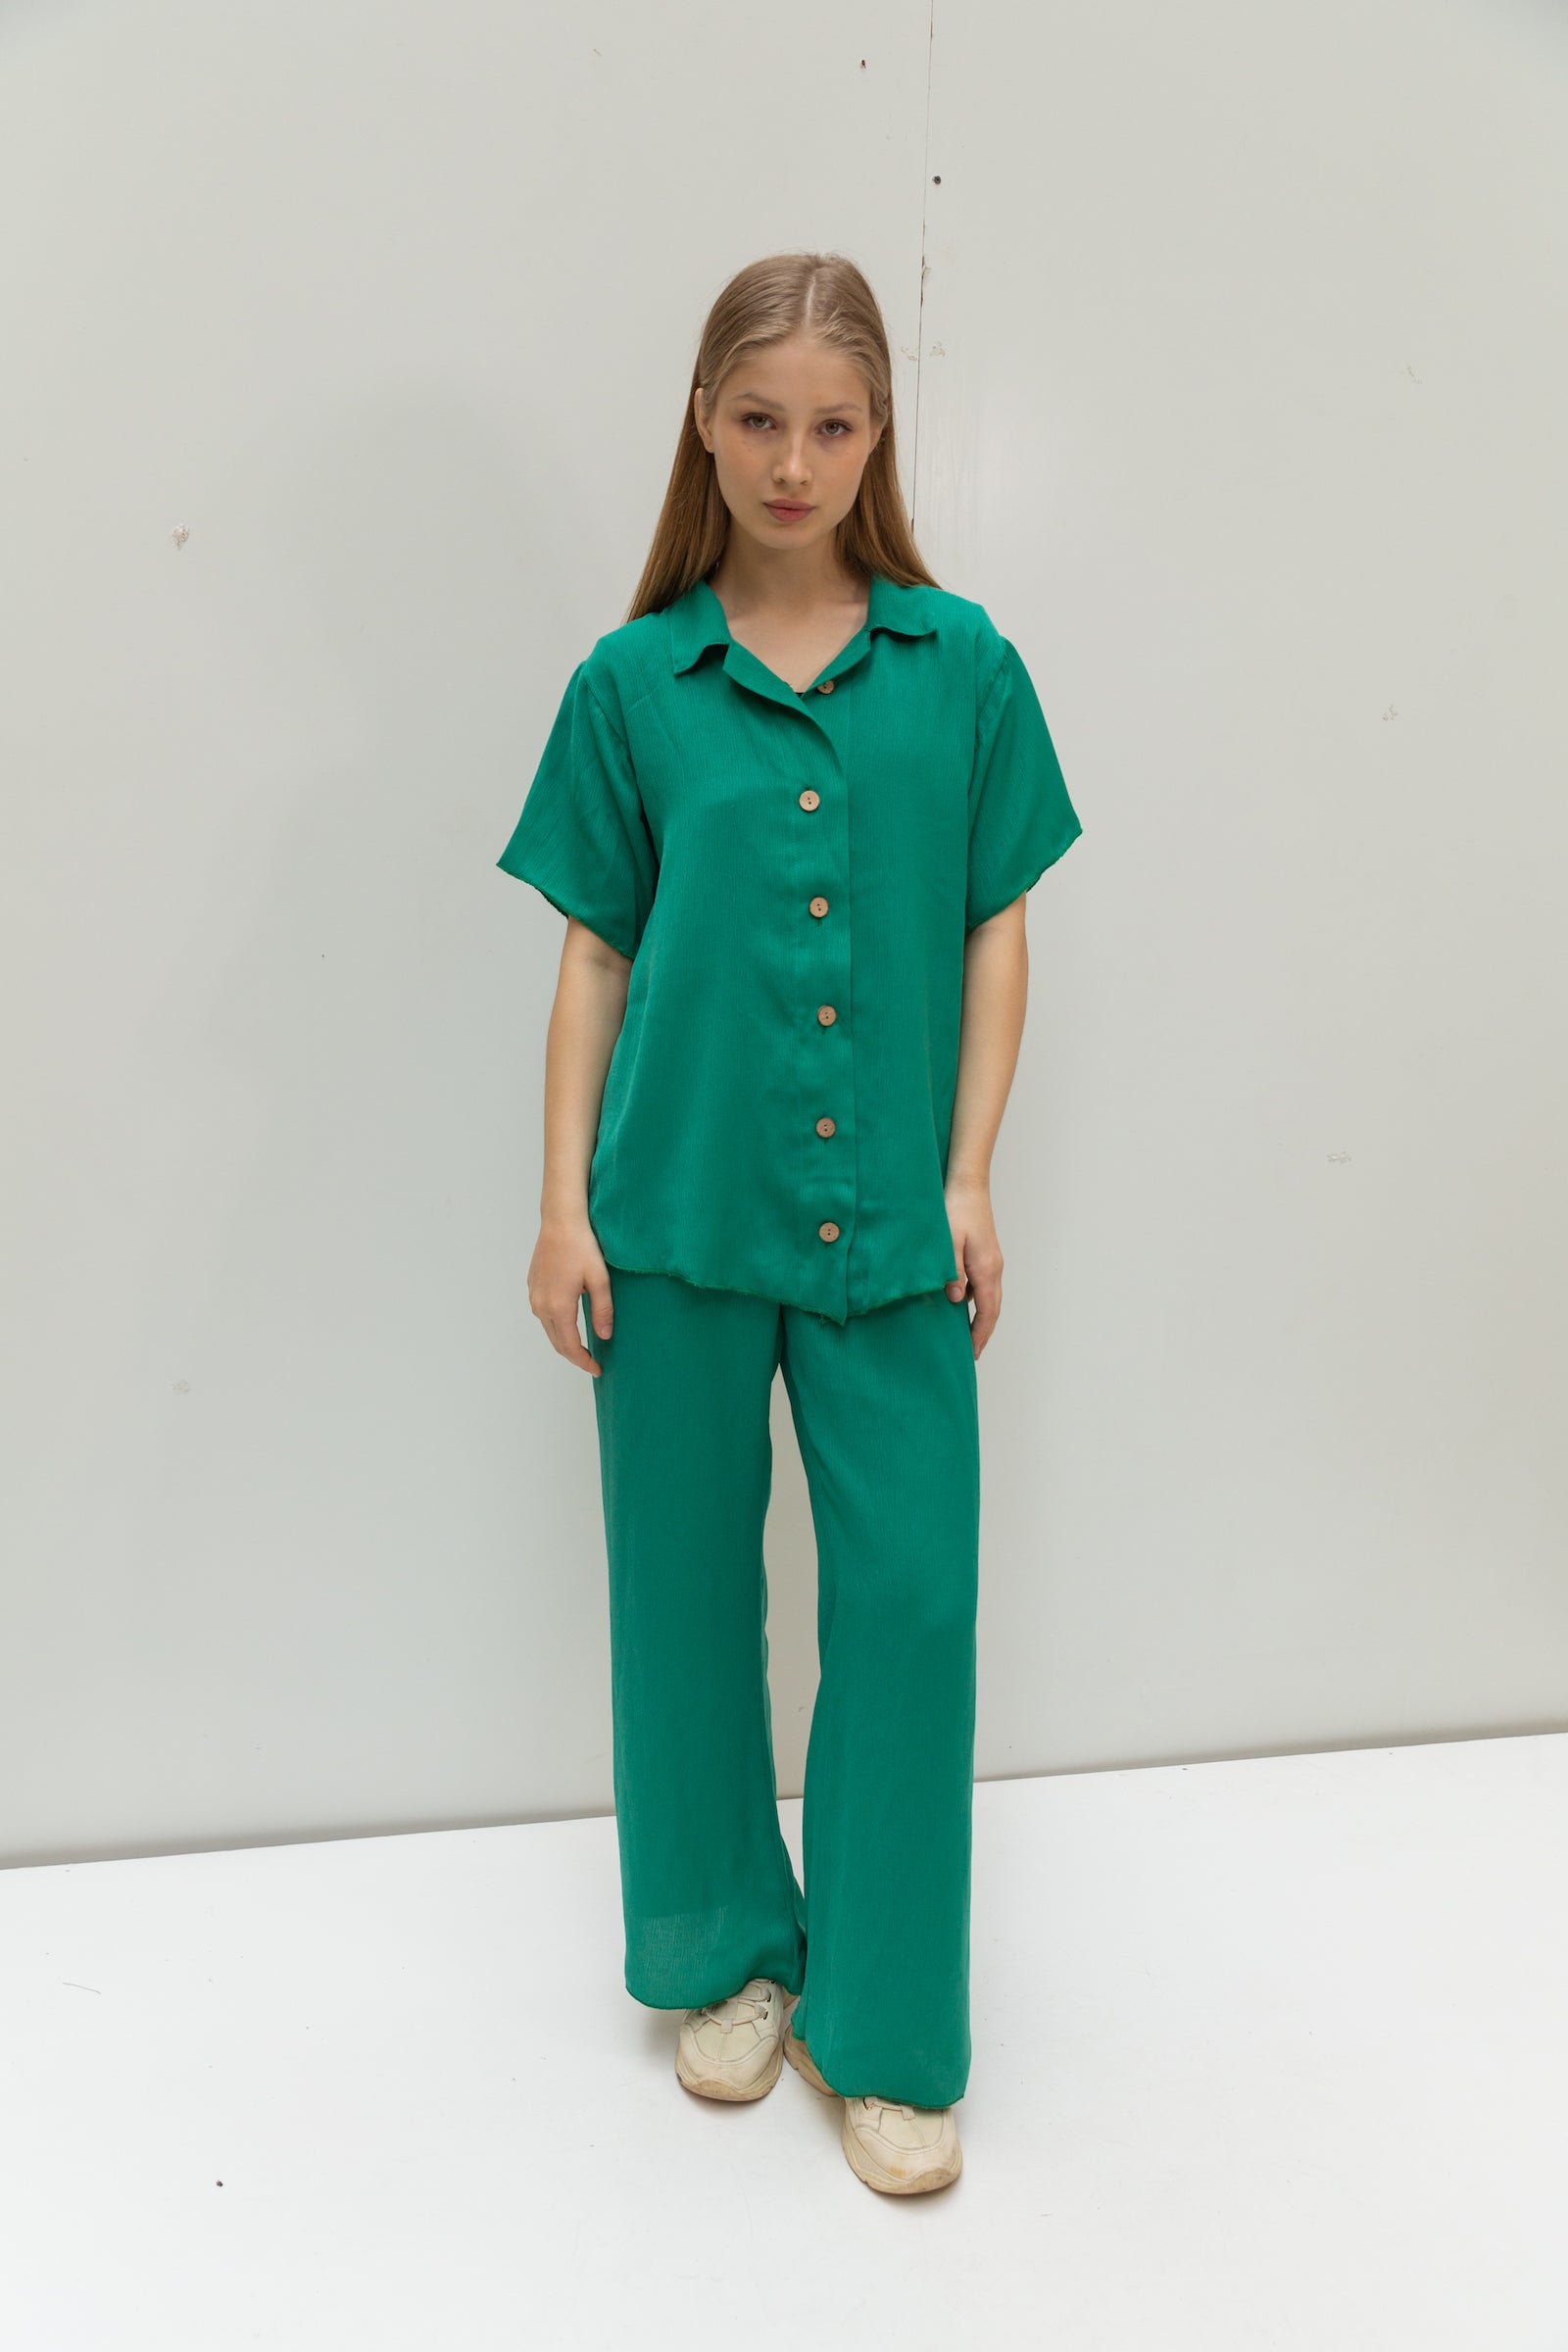 Pleated shirt in turquoise